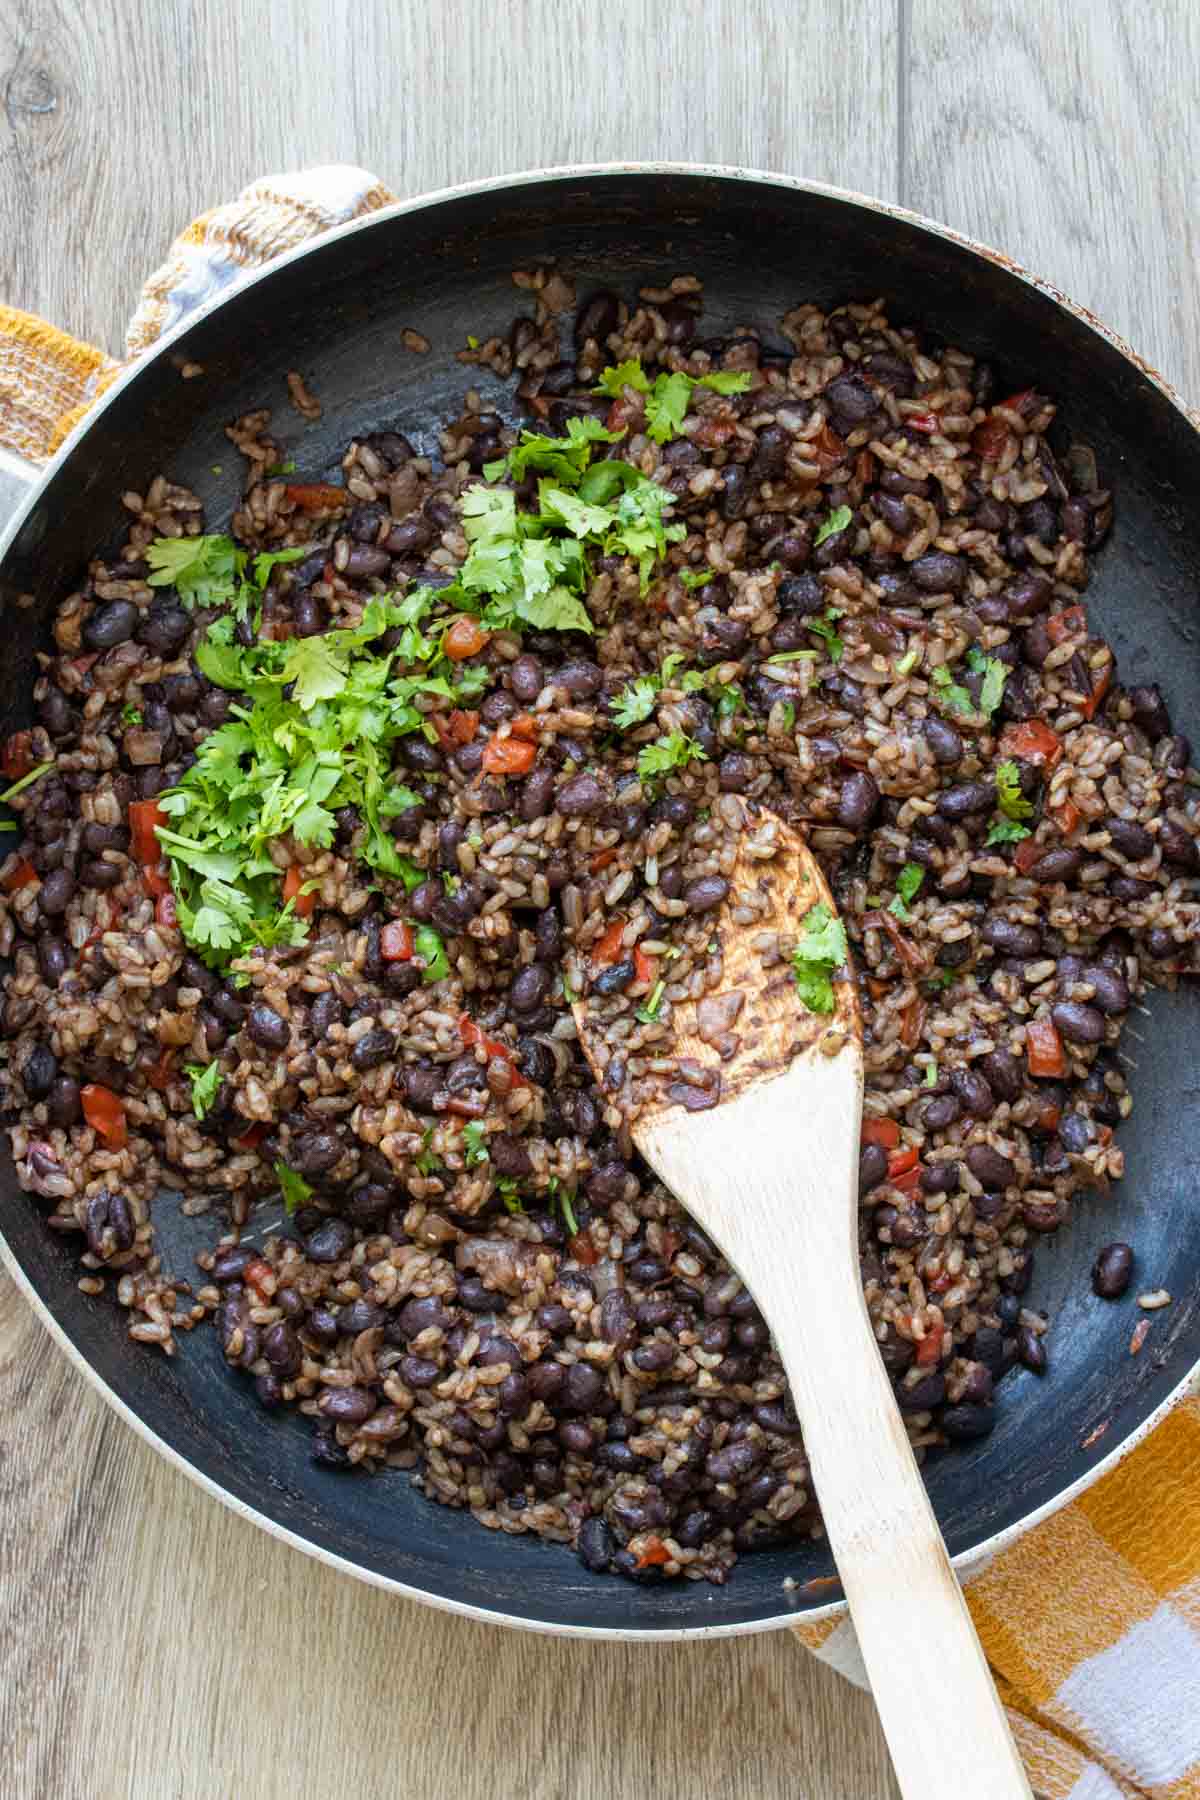 Cilantro being mixed into a black bean, rice and red pepper mix in a pan